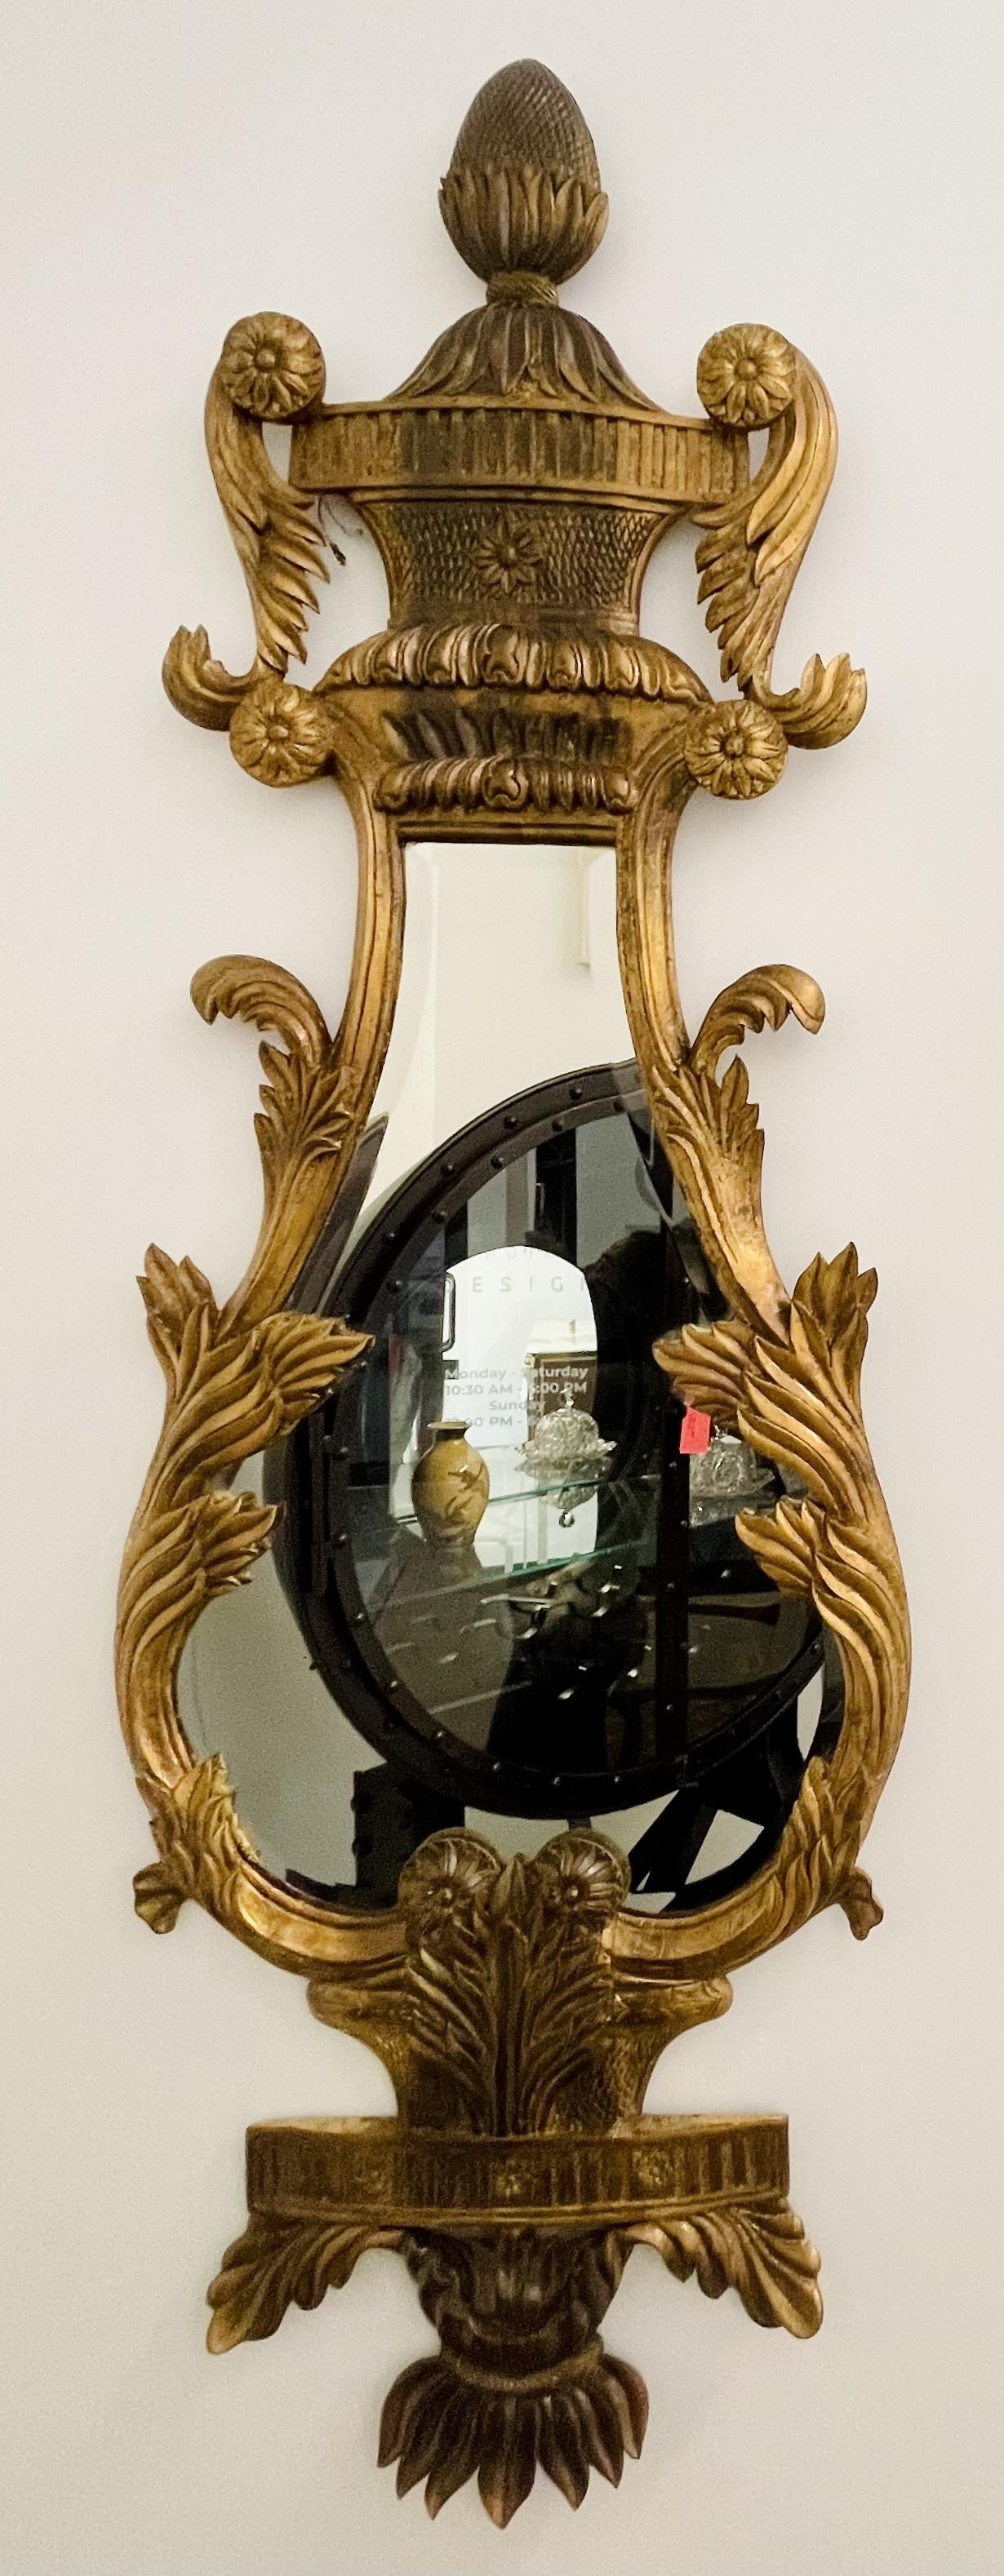 A fine pair of Italian giltwood wall or console mirrors.
 
The pair having a harp shape with pinapple carved pedimont and all around giltwood carvings with a clean beveled mirror center. 
 
IXgZ.